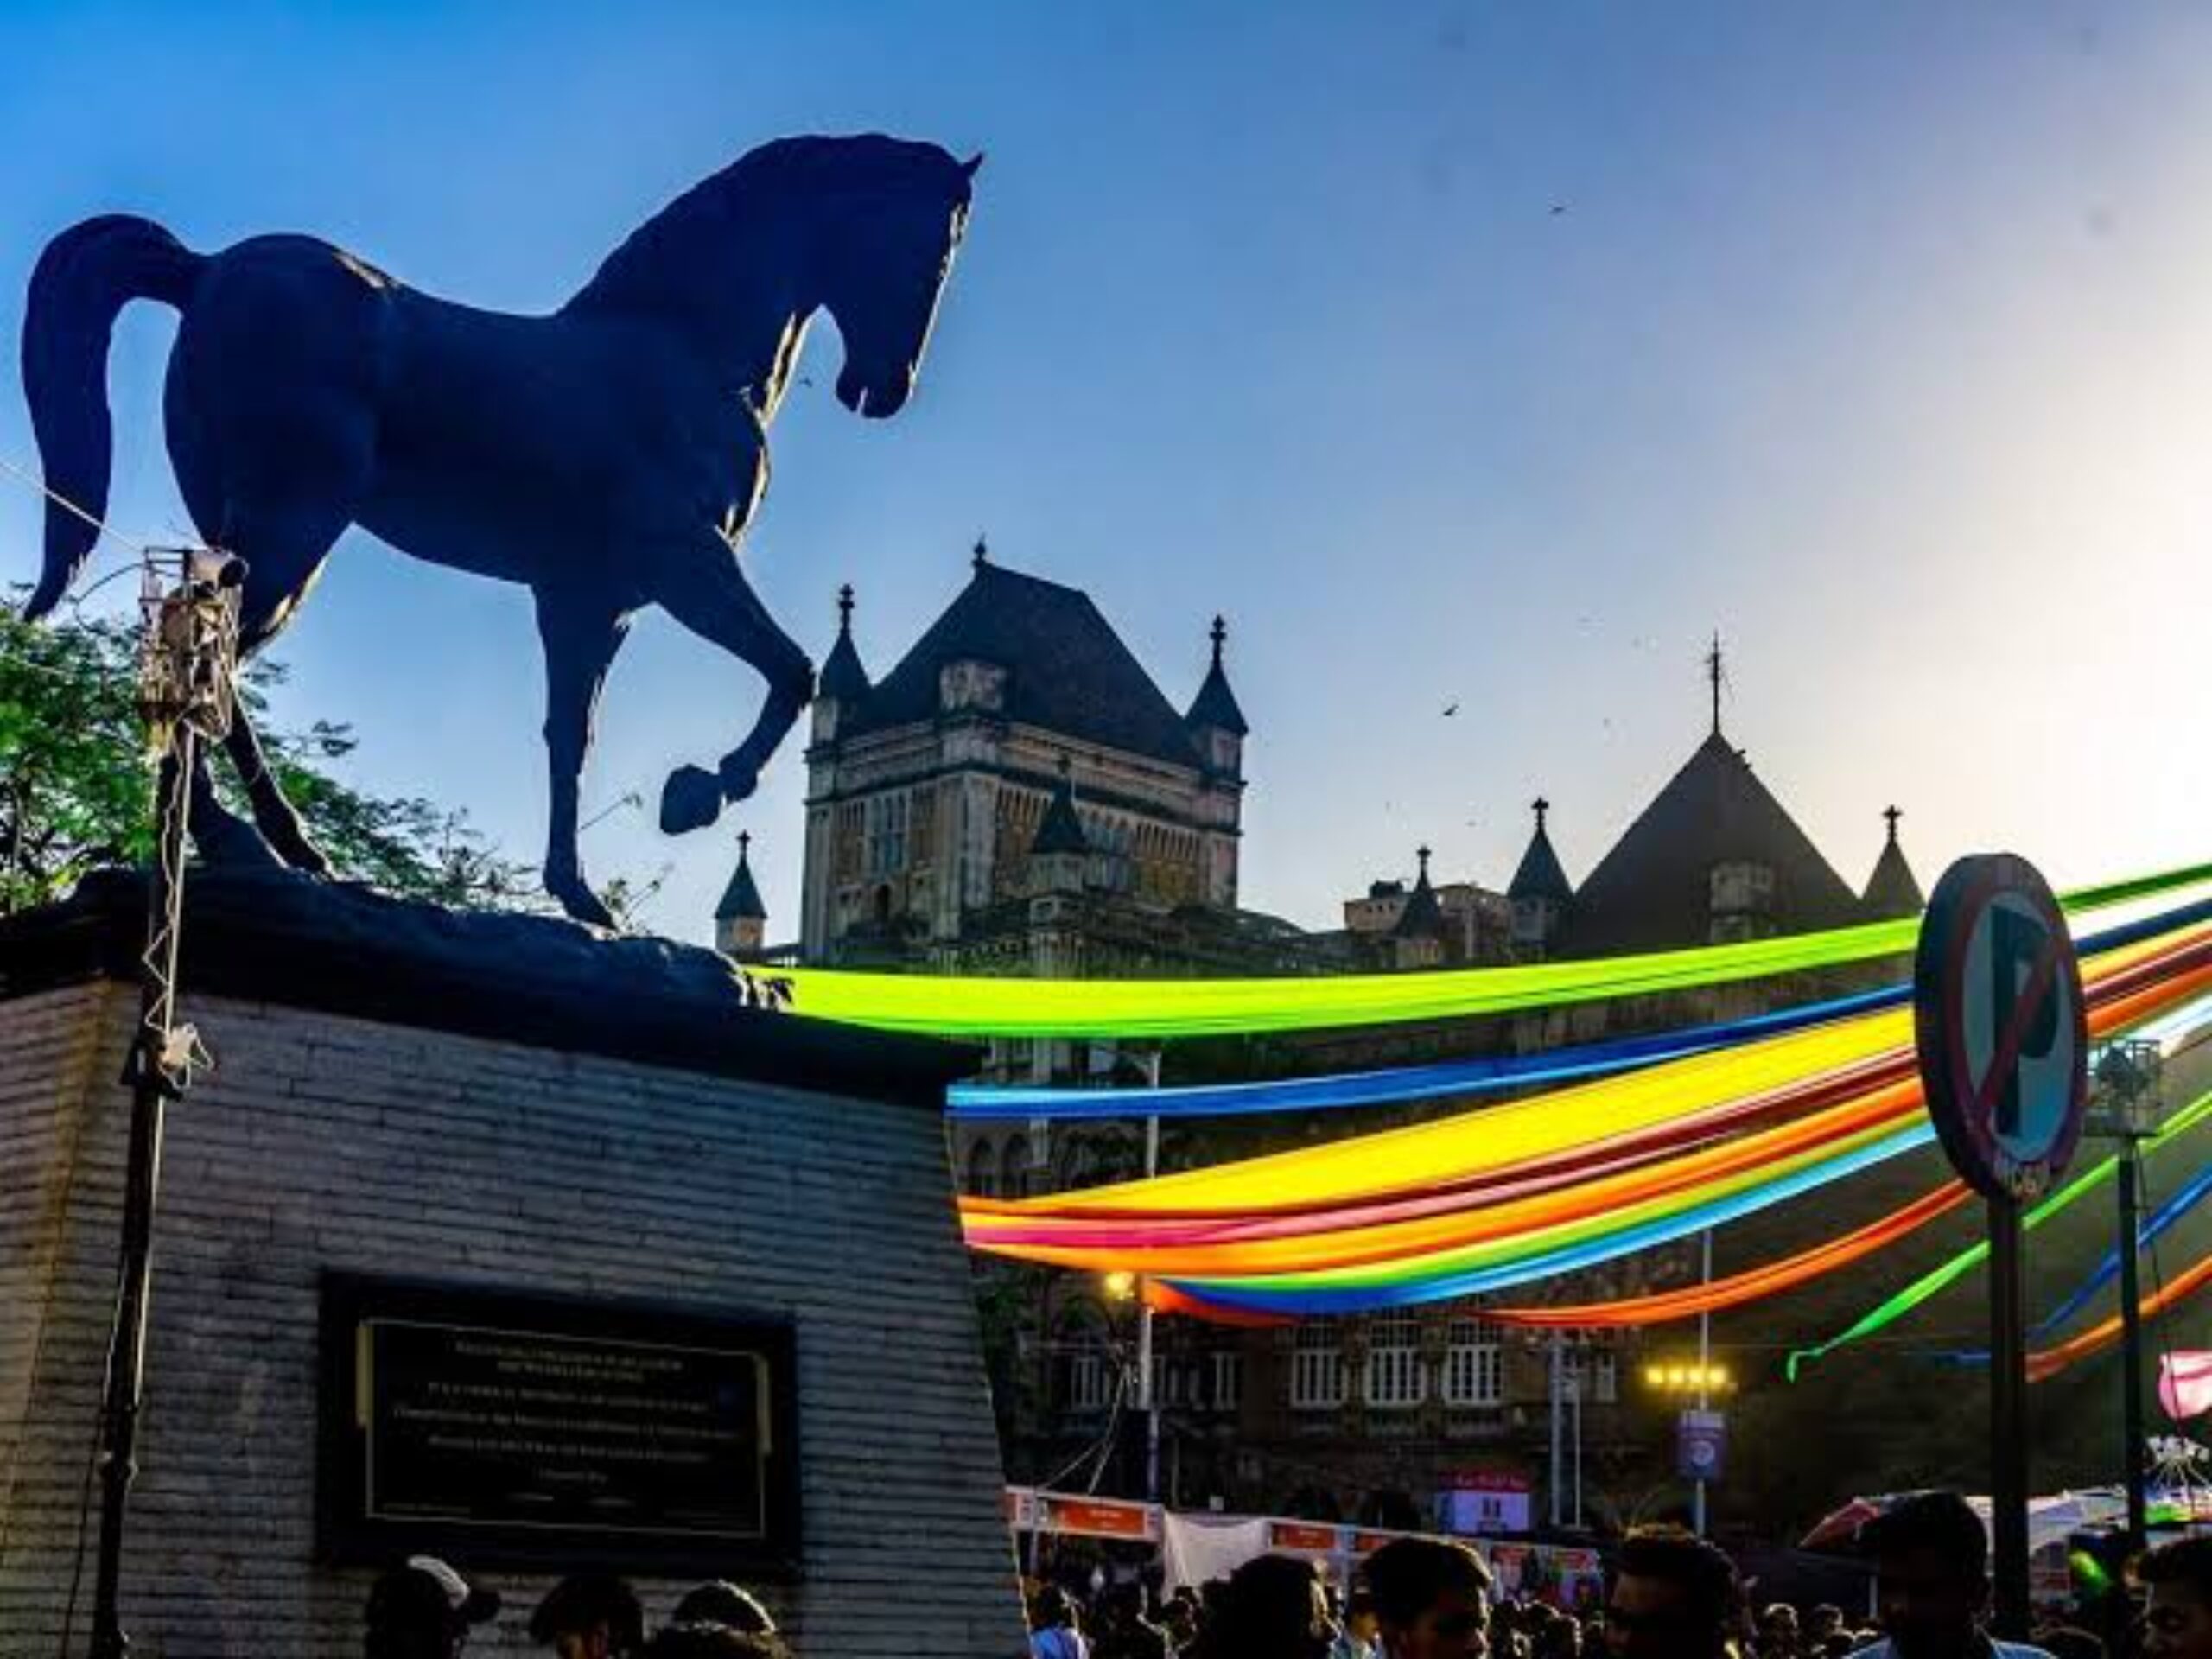 Kala Ghoda Art Festival near town hotels, showcasing vibrant artworks and cultural celebrations in the heart of the city